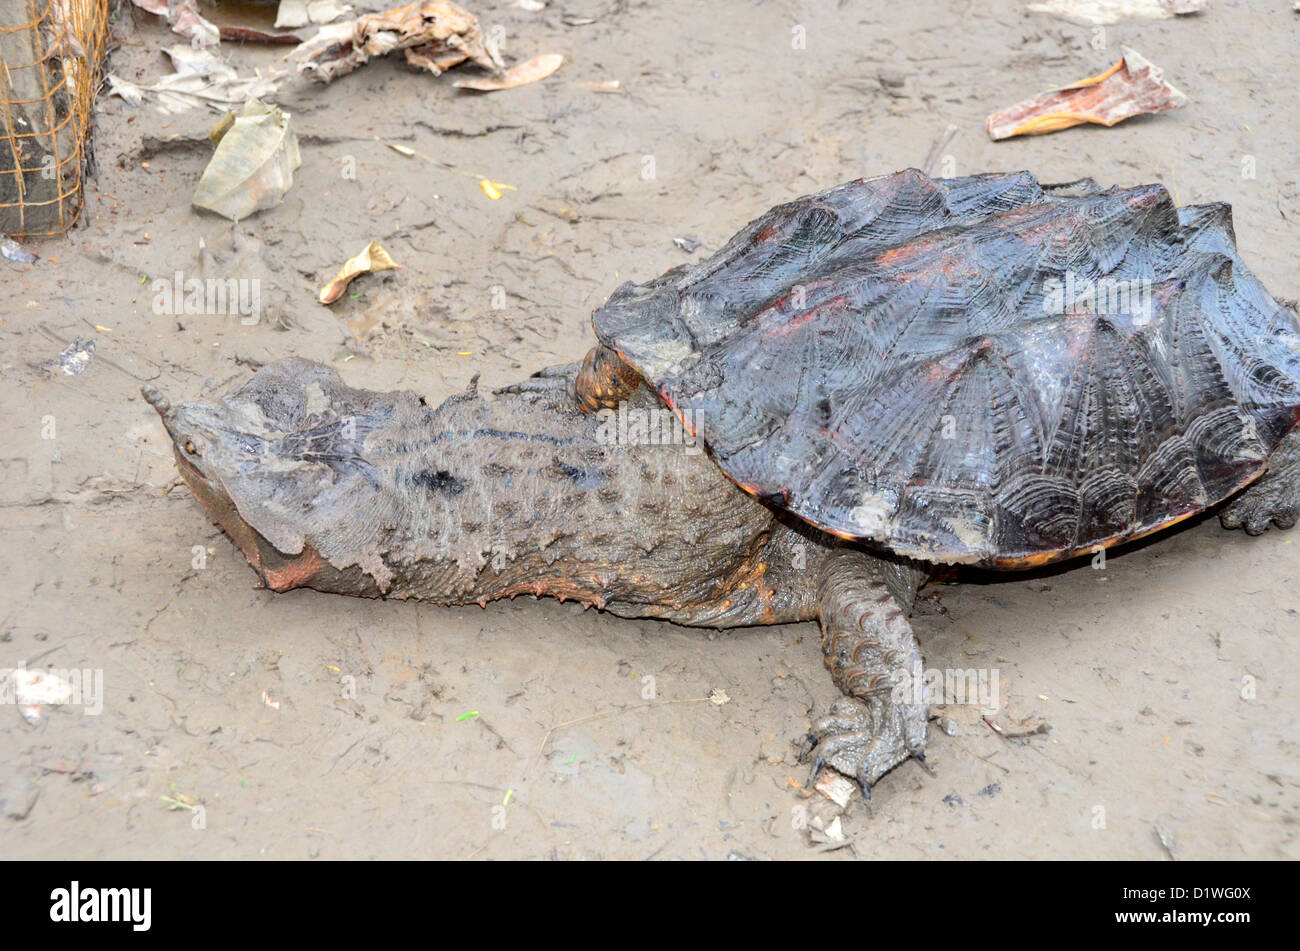 Turtle species from the upper Amazon near Iquitos, Peru Stock Photo